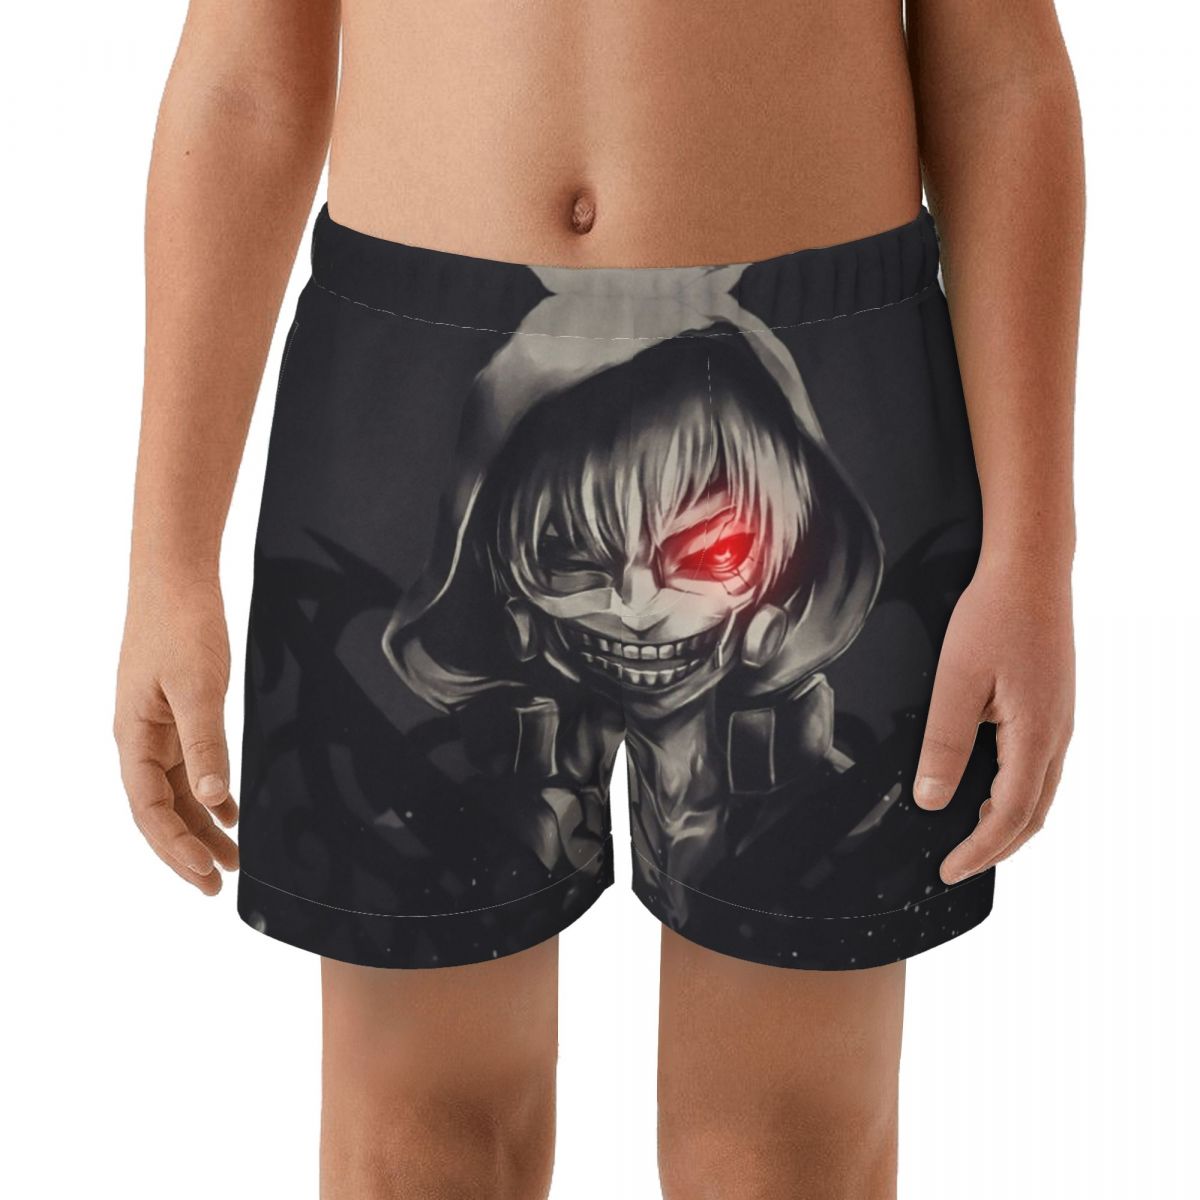 Tokyo Ghoul Shorts boy Quick Dry Swimwear Swimsuits Swim Boxer Trunks Surf Board Shorts With belt - Anime Swimsuits